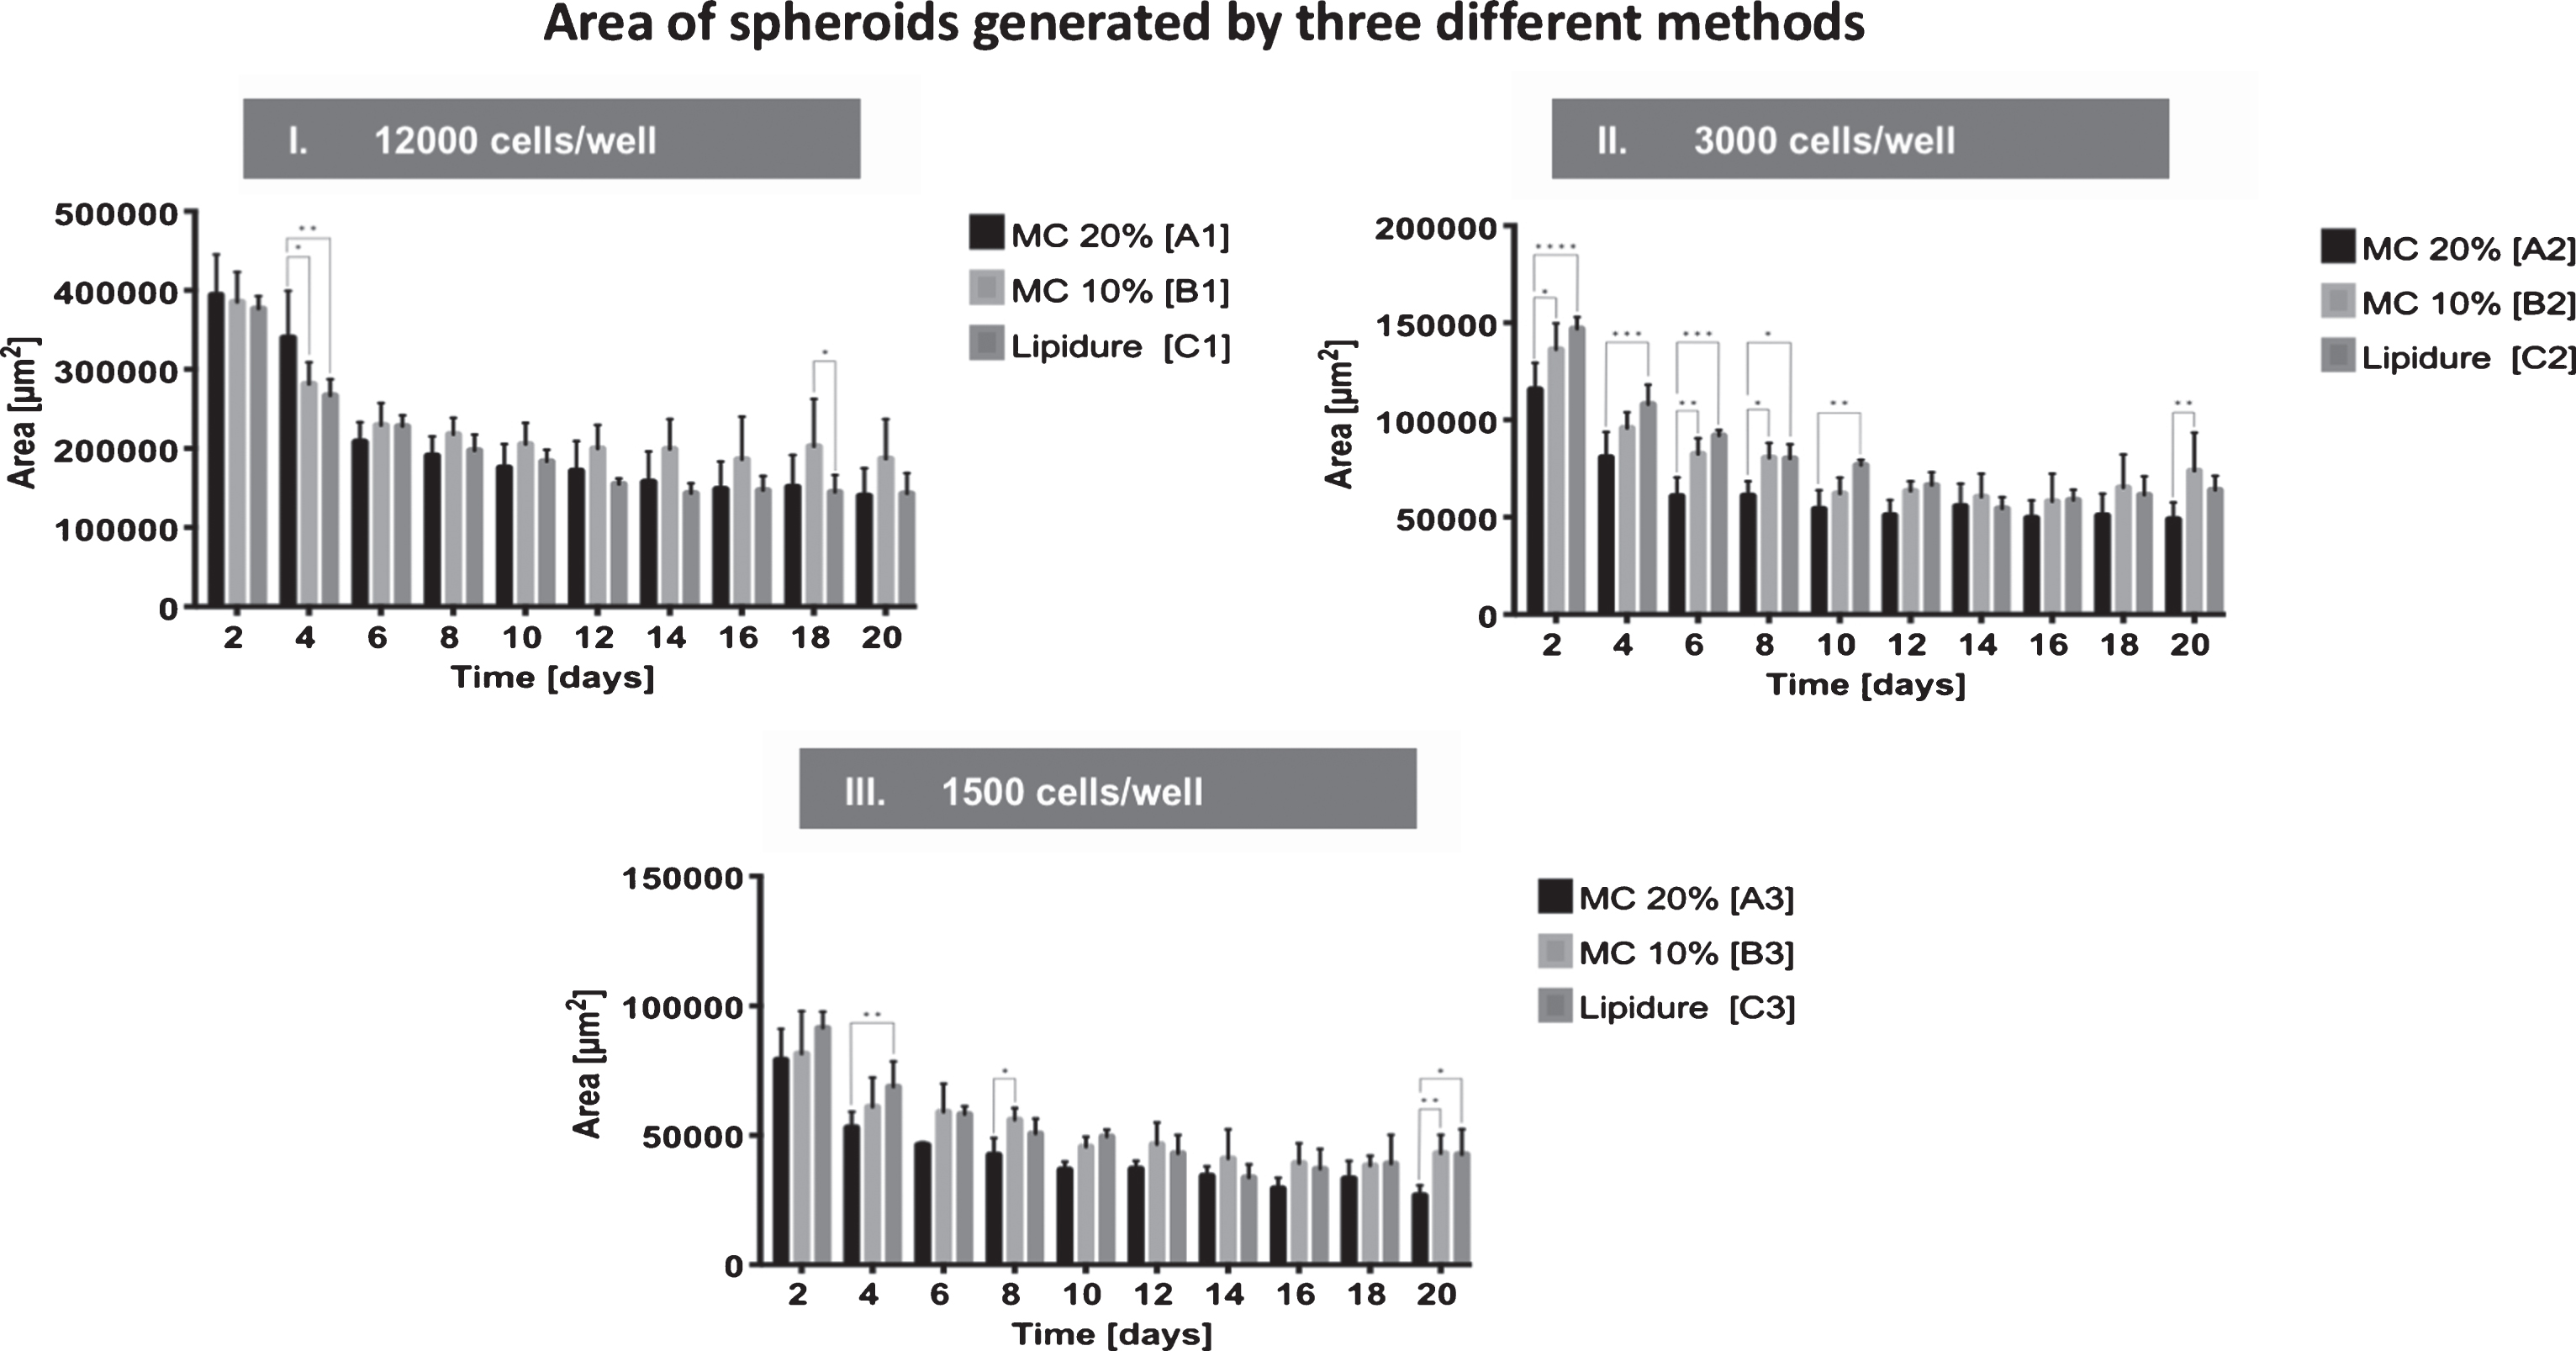 Effect of the culture method on spheroid generation. Spheroids were generated by three different methods: Methylcellulose 20%, Methylcellulose 10% and Lipidure® plate, each with an initial cell density of I. 12,000 cells/well, II. 3,000 cells/well or III. 1,500 cells/well. Areas of the spheroids were measured at days 2, 4, 6, 8, 10, 12, 14, 16, 18, and 20. All values are expressed as mean values±standard deviation.